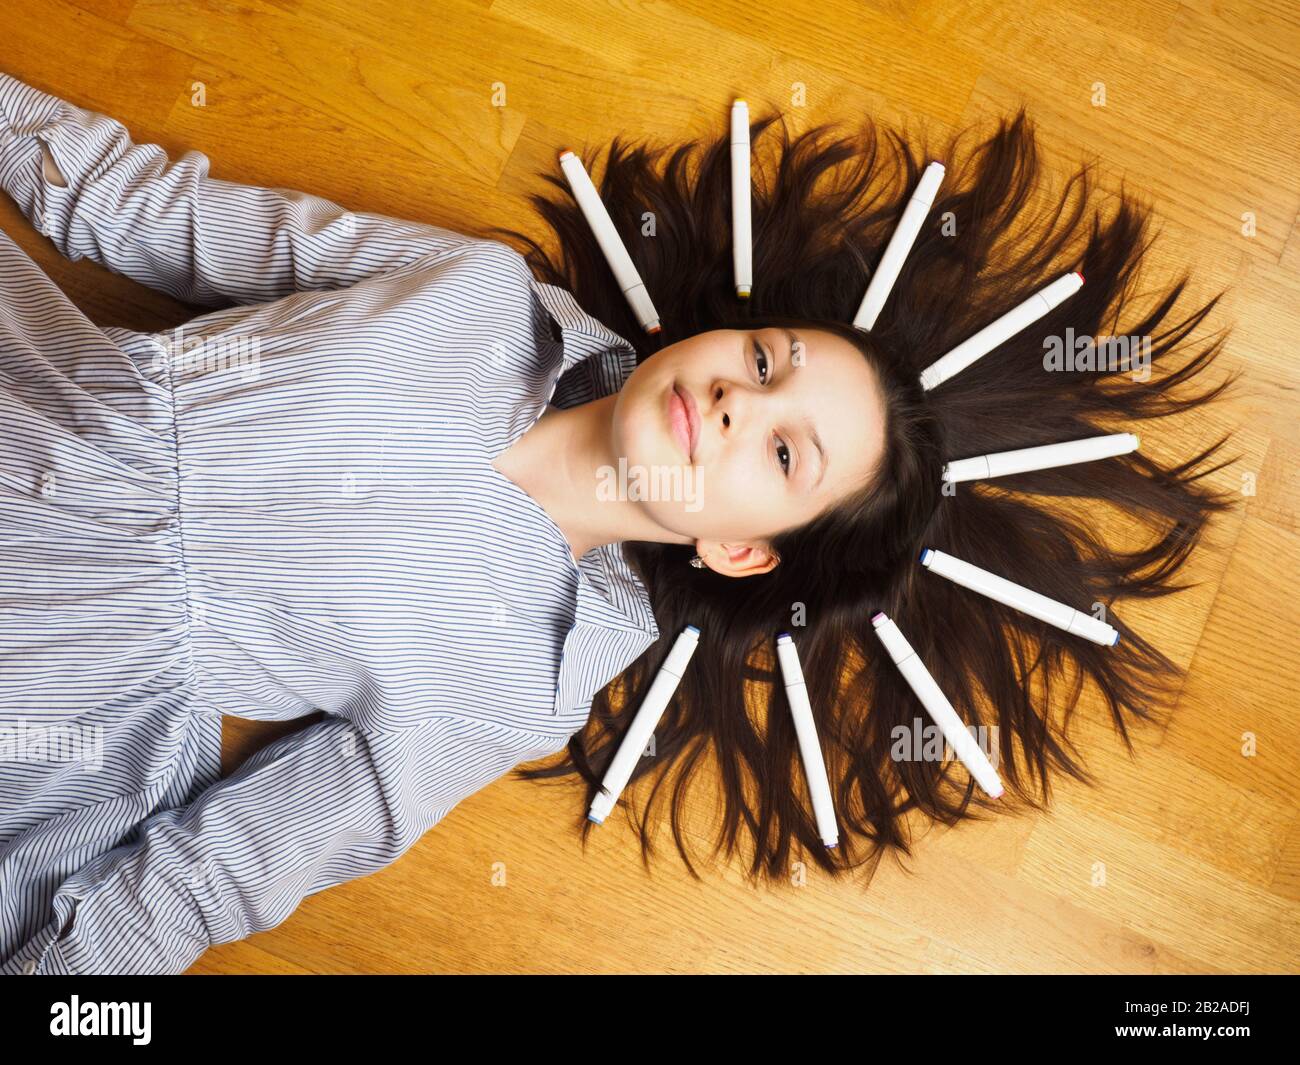 Young girl artist lies on a wooden floor in a light dress with her hair fluffy on which are felt-tip pens for drawing Stock Photo